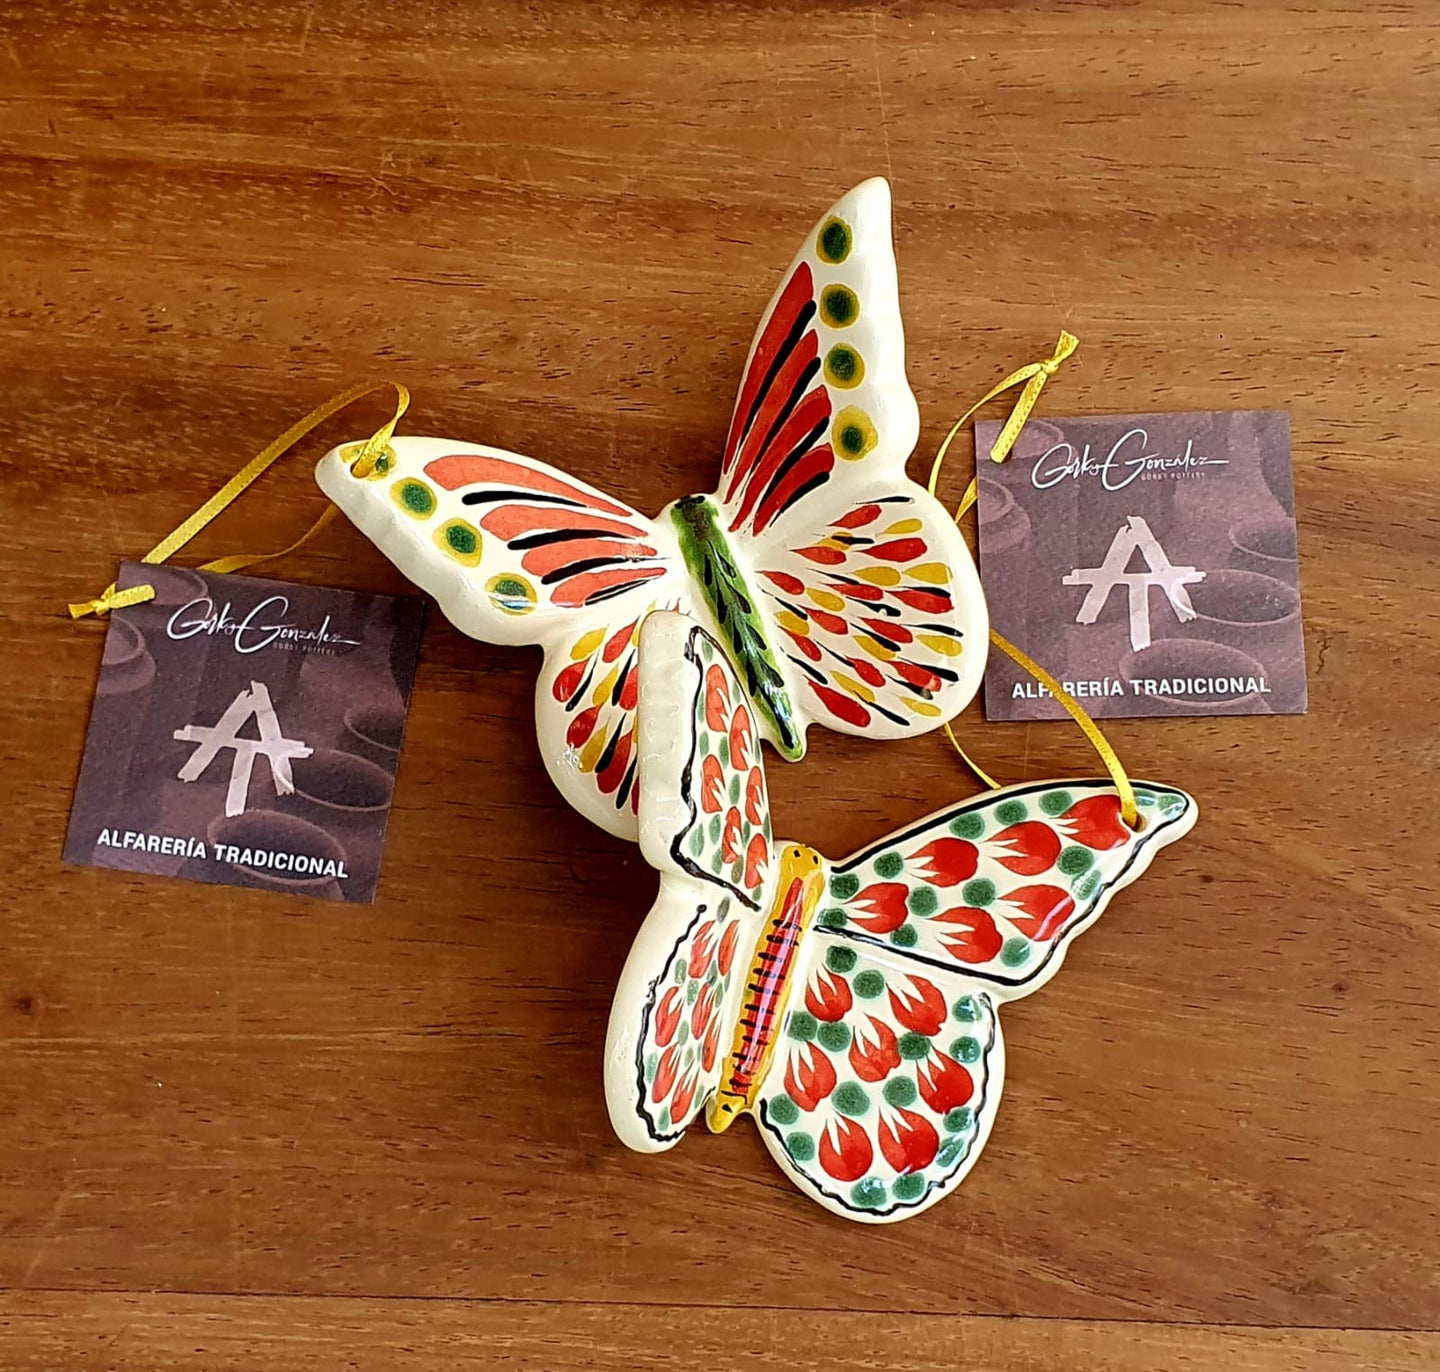 Ornament Butterfly Set of 2 Multi-colors